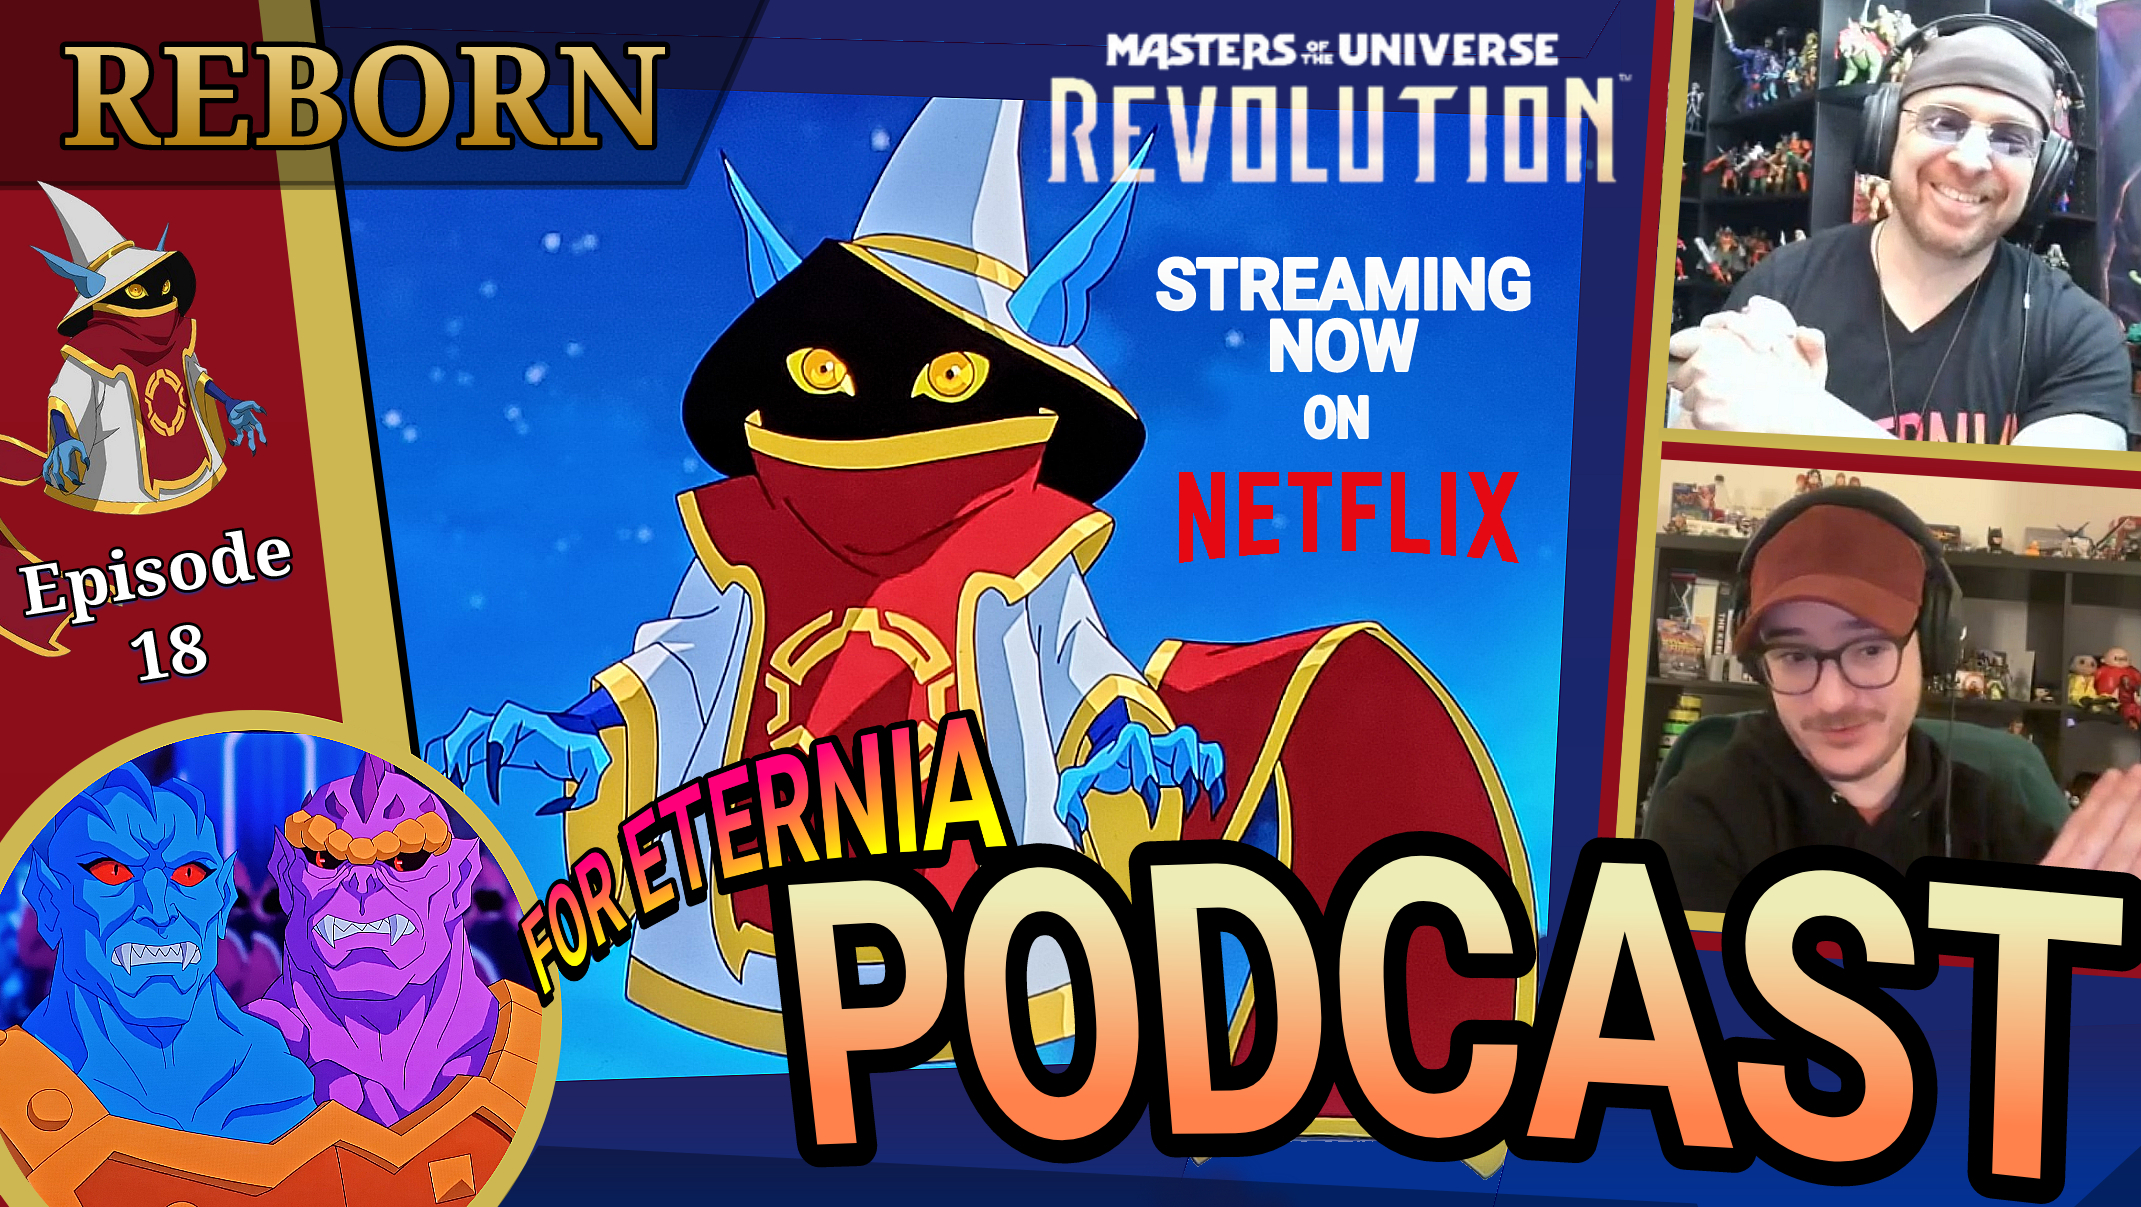 REBORN! Talking the New ”Masters of the Universe: Revolution” Series and more with Orko star Griffin Newman